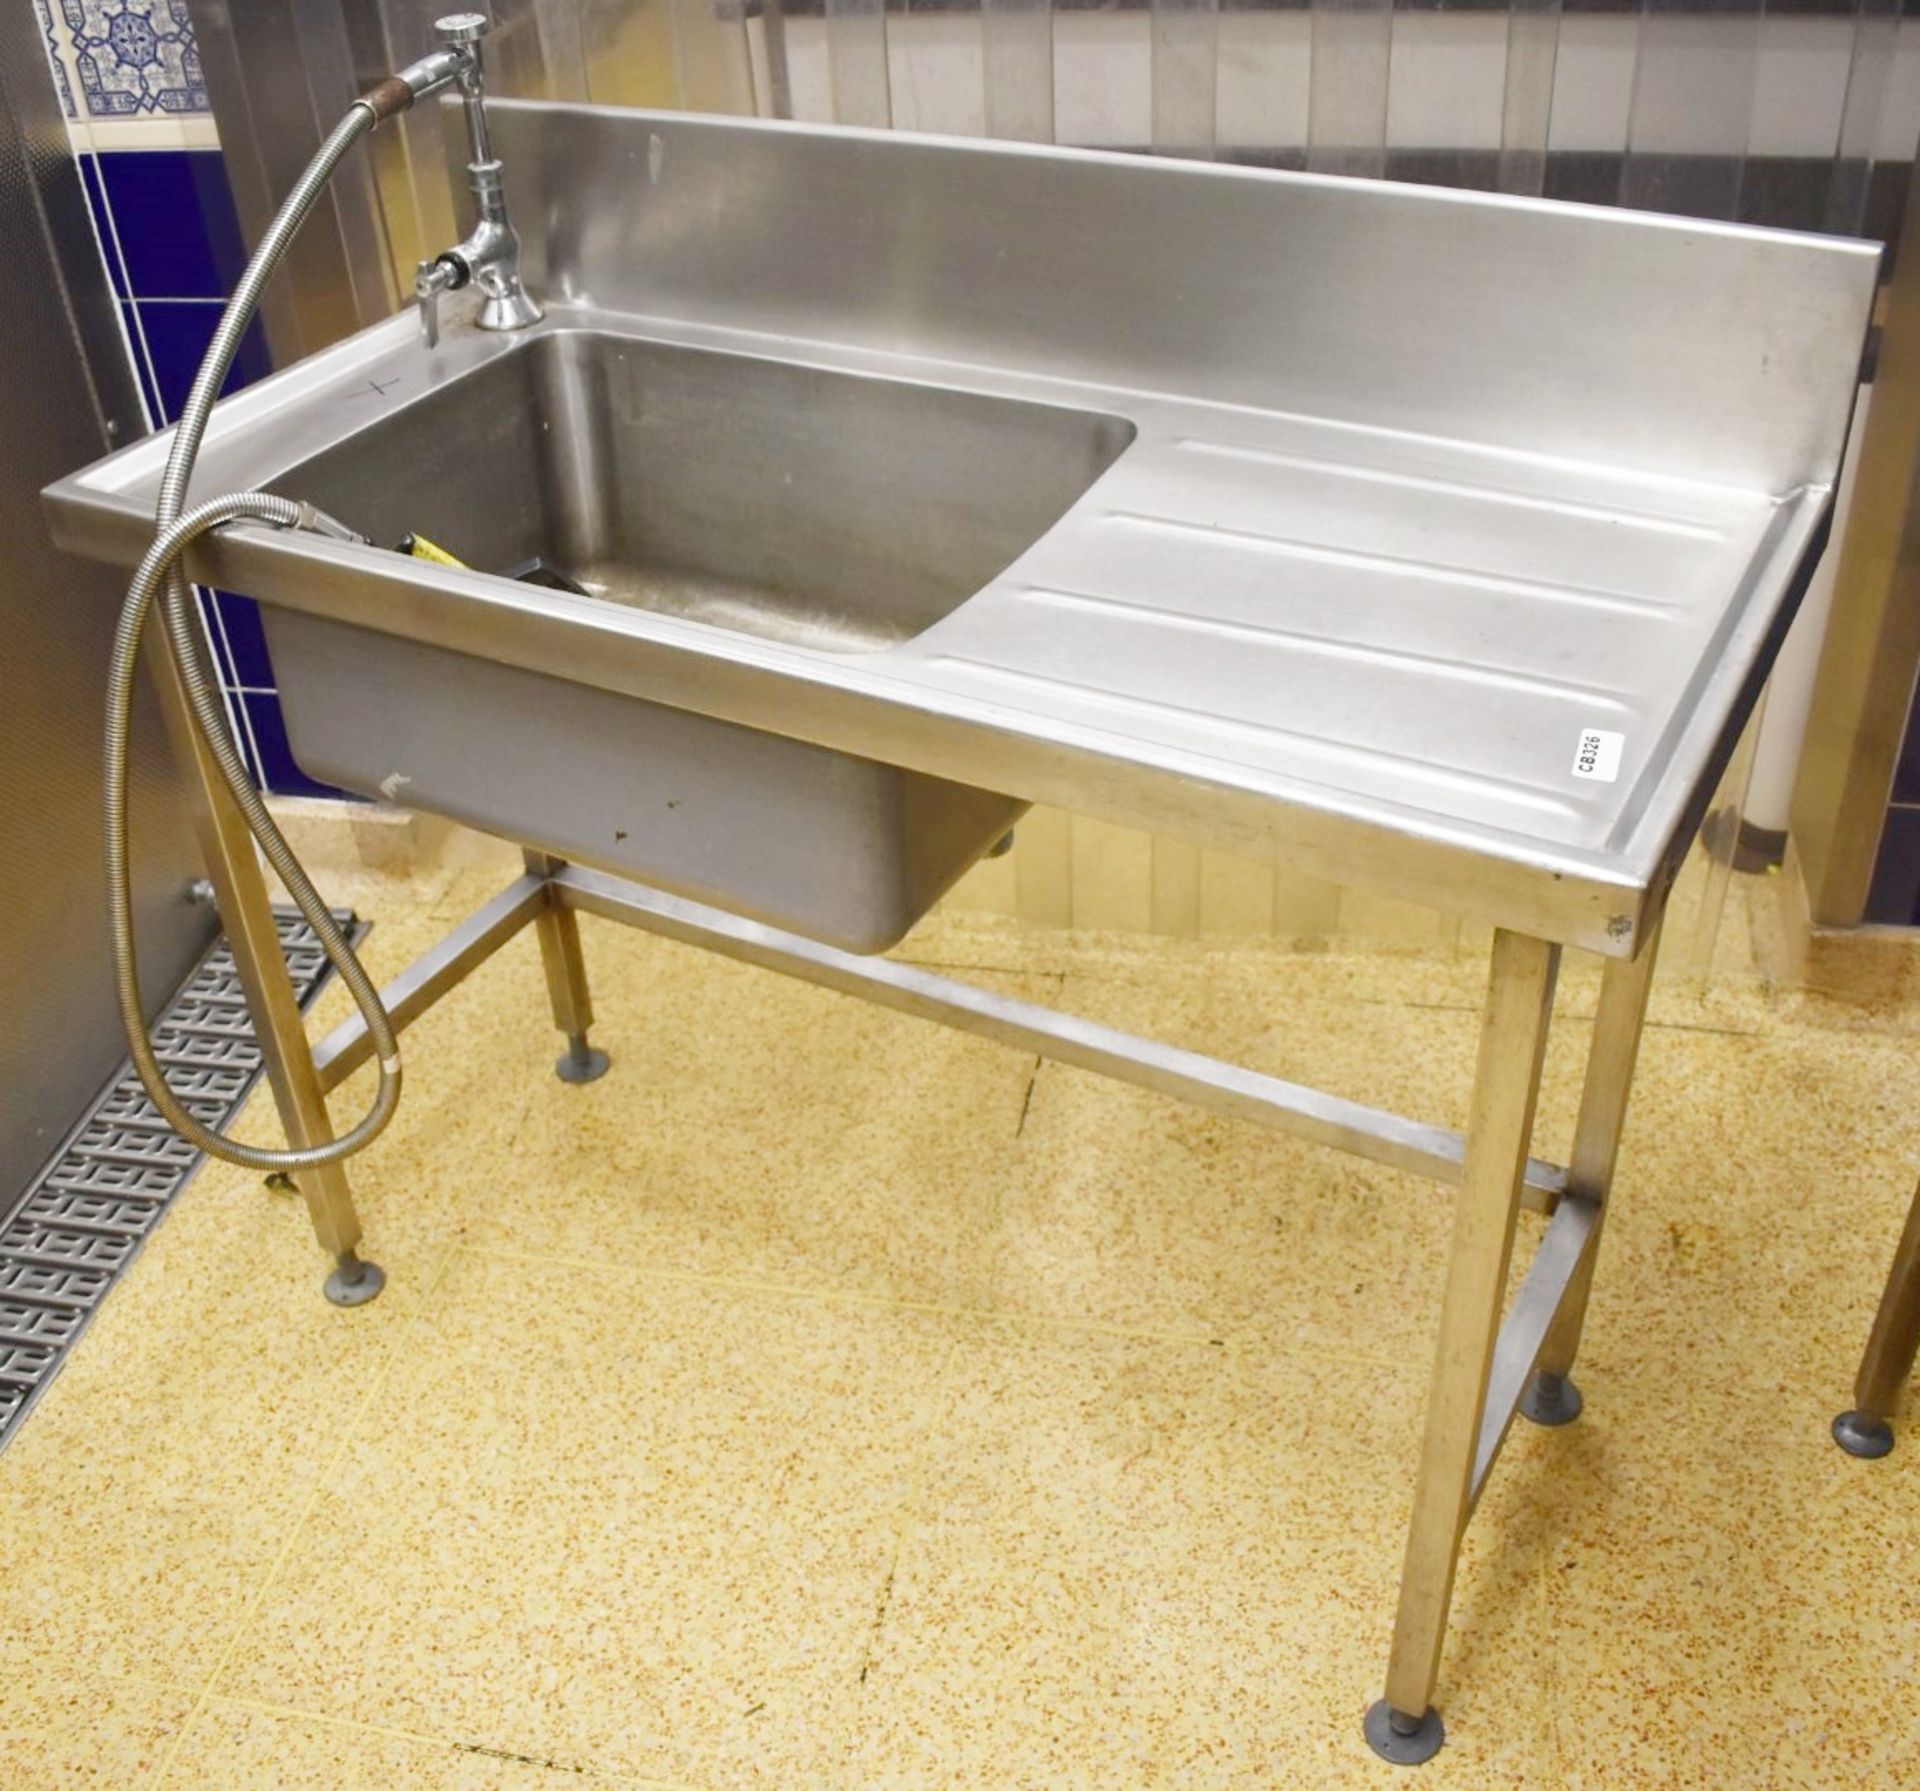 1 x Stainless Steel Sink Basin Wash Unit With Splashback and Hose Rinser Tap - H81 x W105 x D50